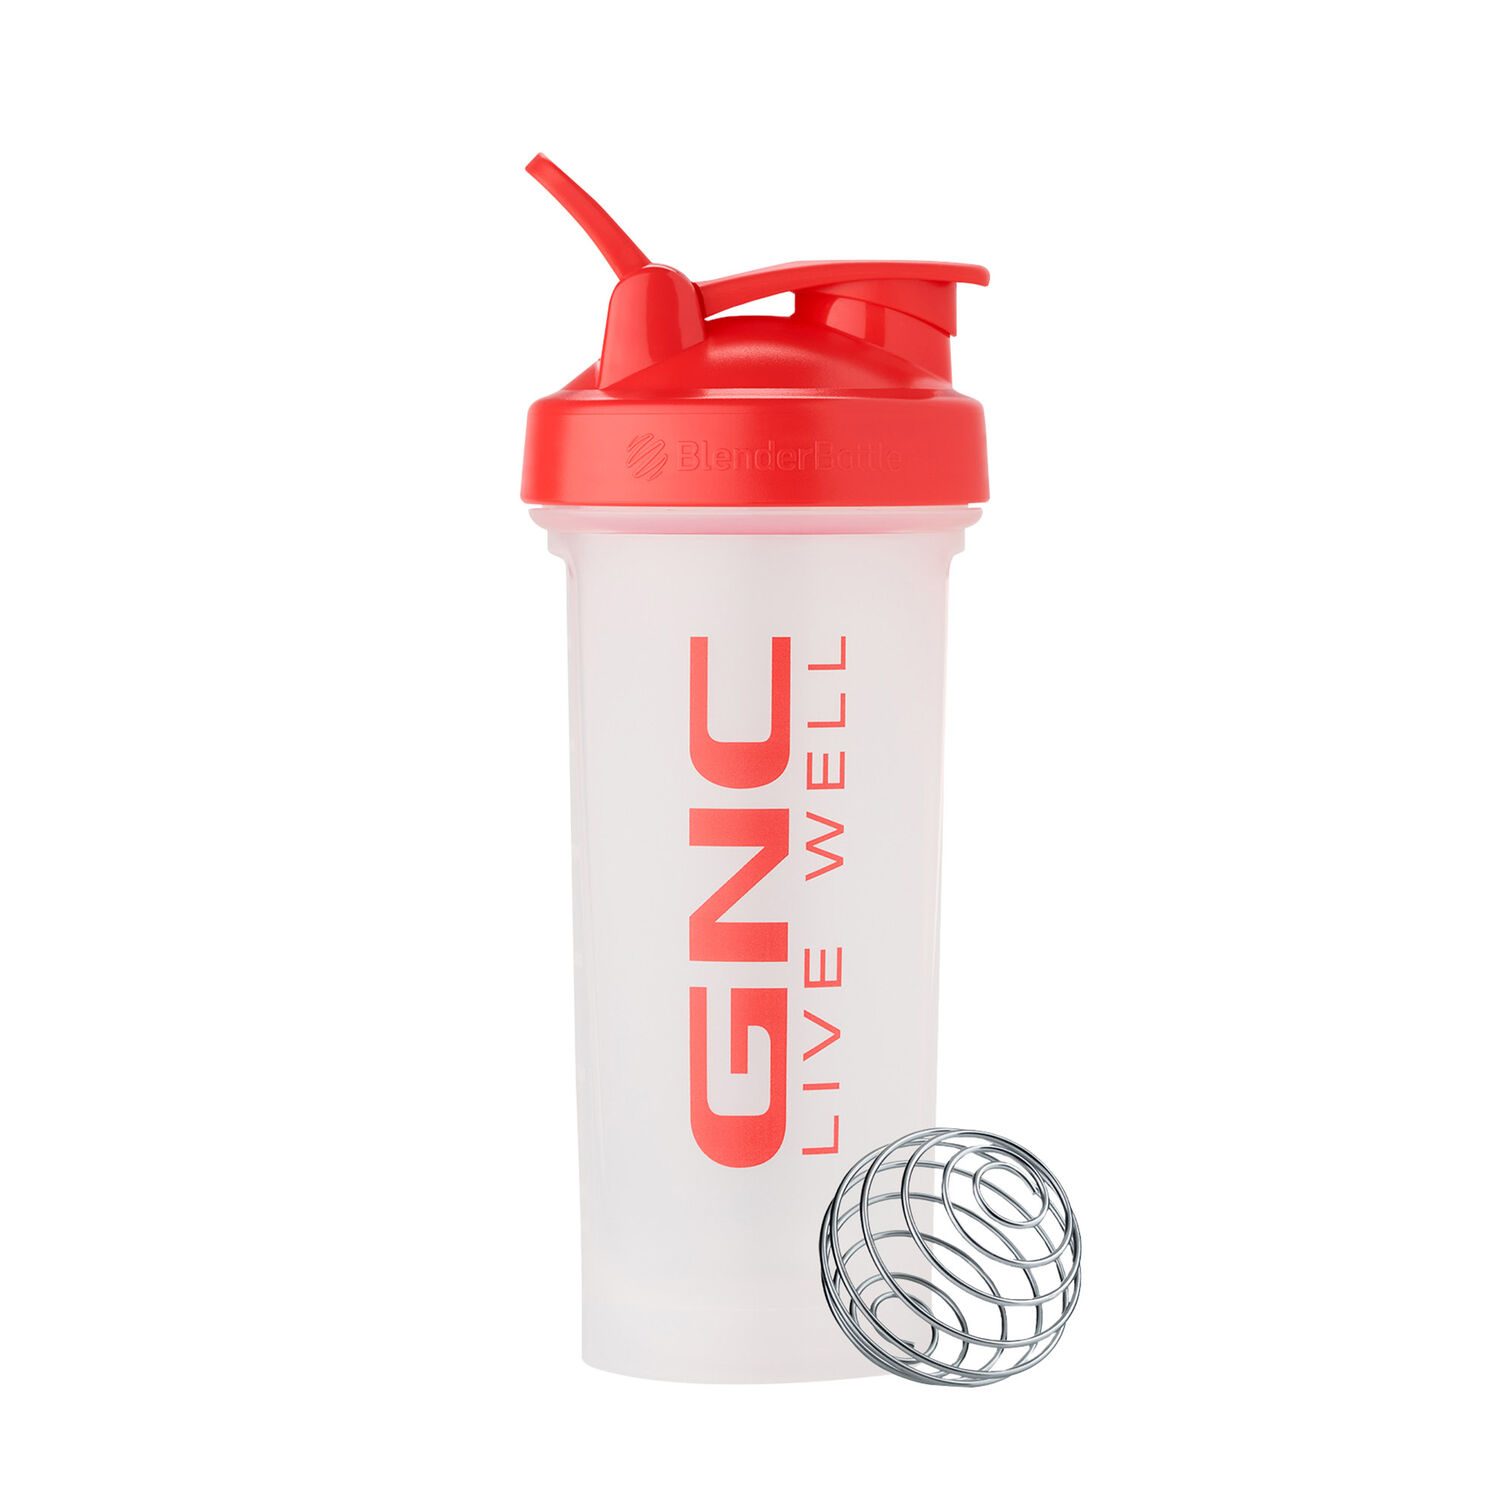 GNC Mobile - How do you Helimix?New Helimix bottles are available at GNC!  These fantastic bottles eliminate the everyday shaker conflicts such as ;  clumpy blends, inefficient cleaning, and non-durability. Check it